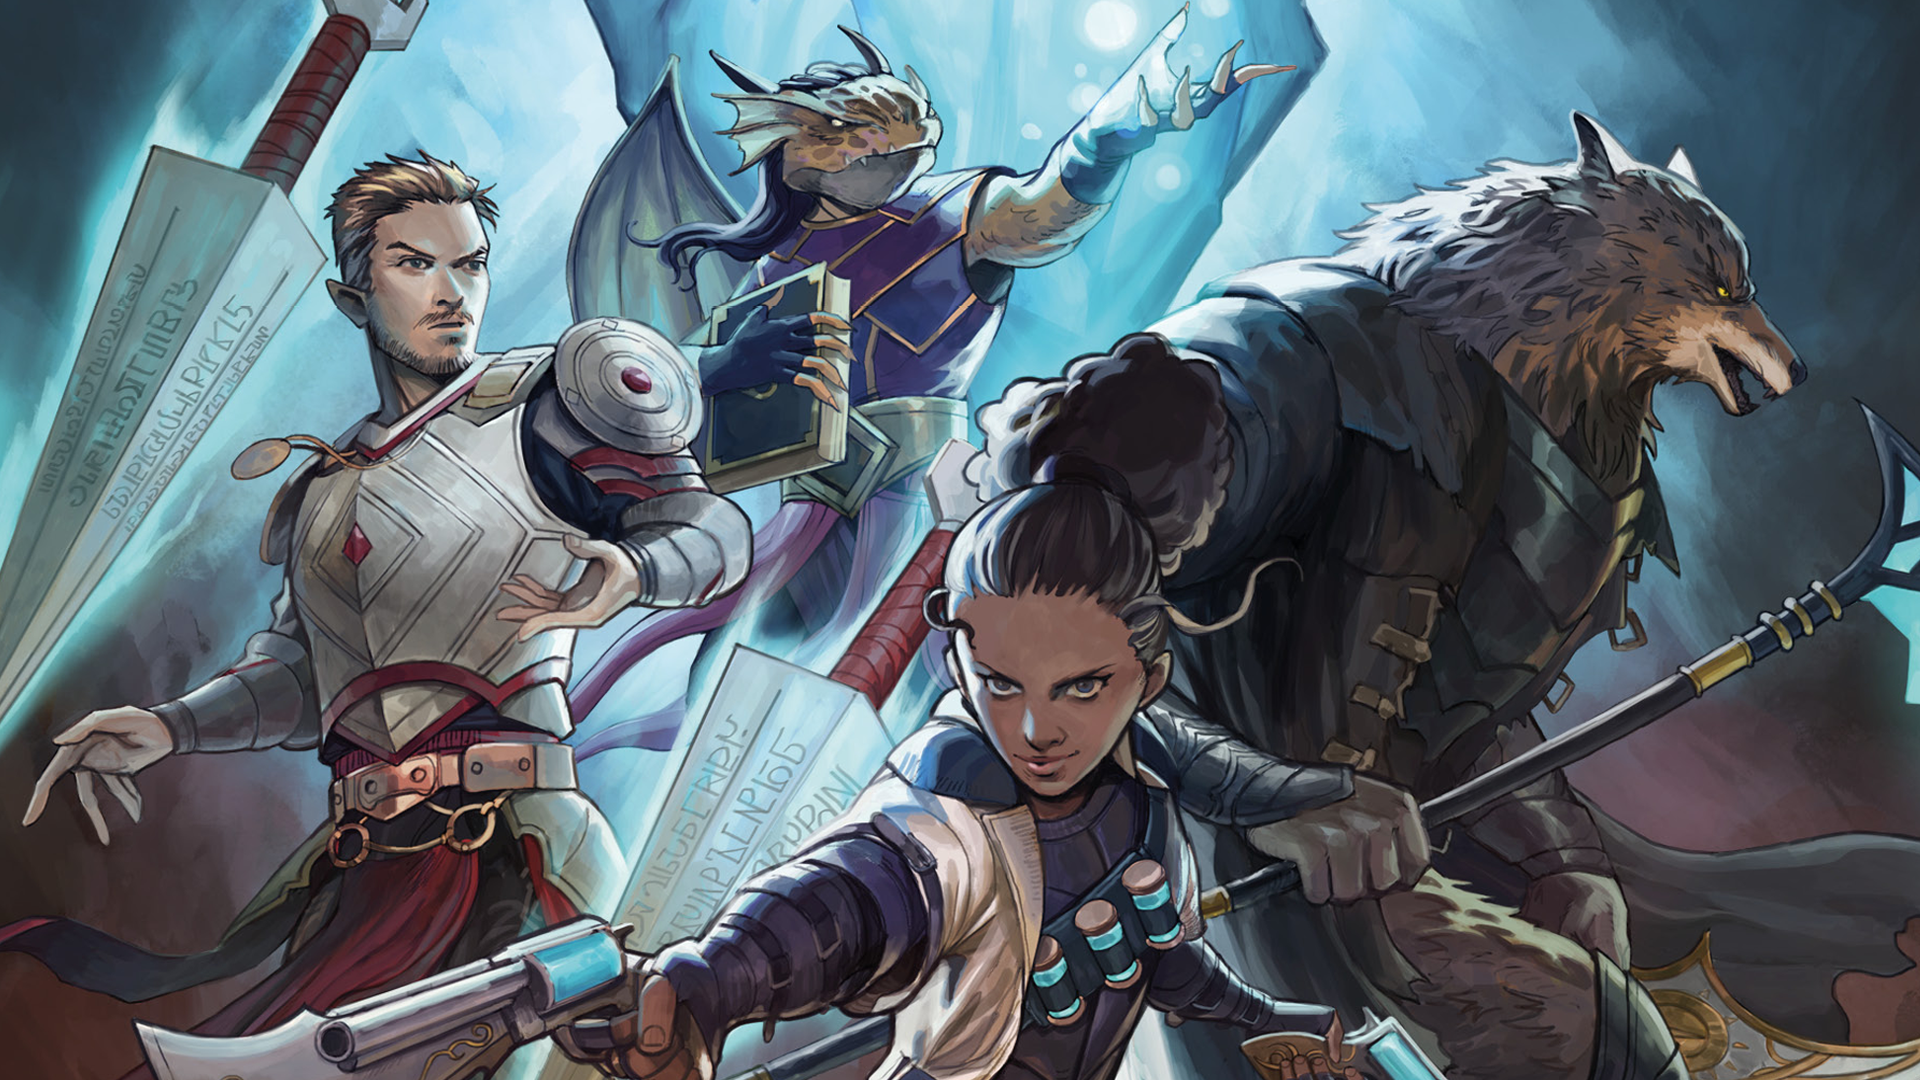 Image for Final Fantasy 14 meets D&D and Lancer in tabletop RPG Beacon